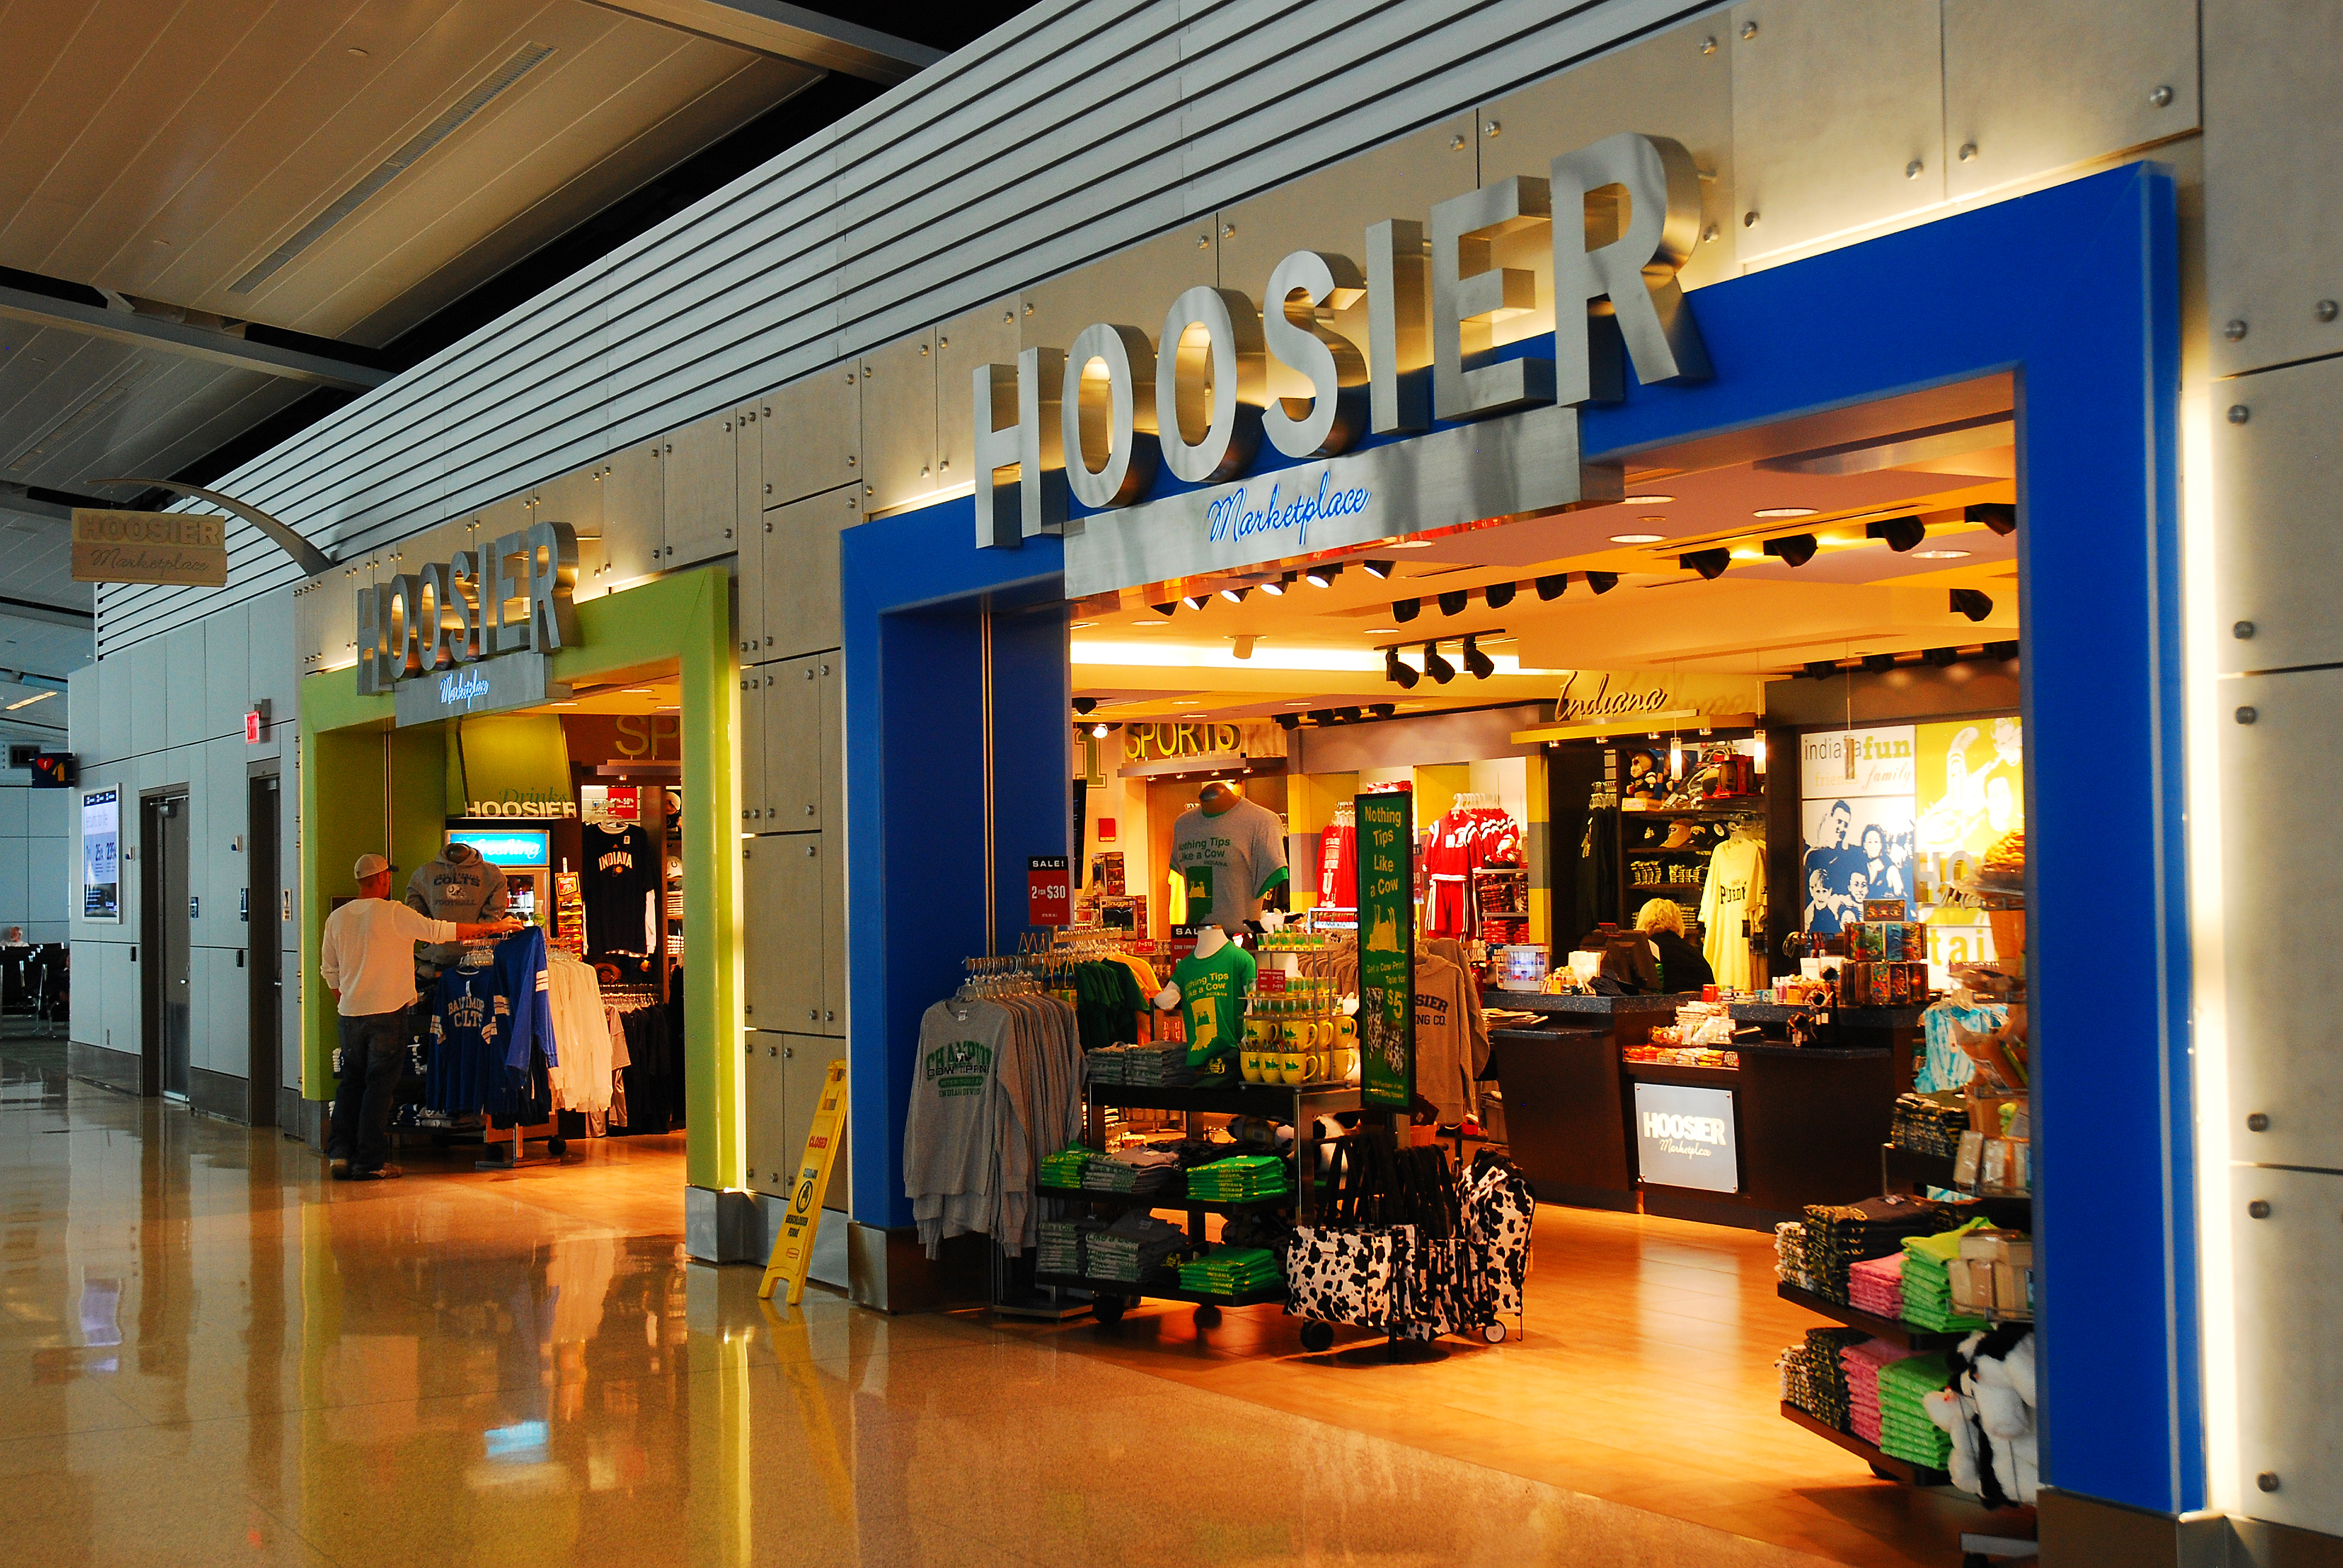 May 31, 2010 Indianapolis, IN, USA Hoosier Marketplace is a souvenir and gift shop located in the Indianapolis International Airport